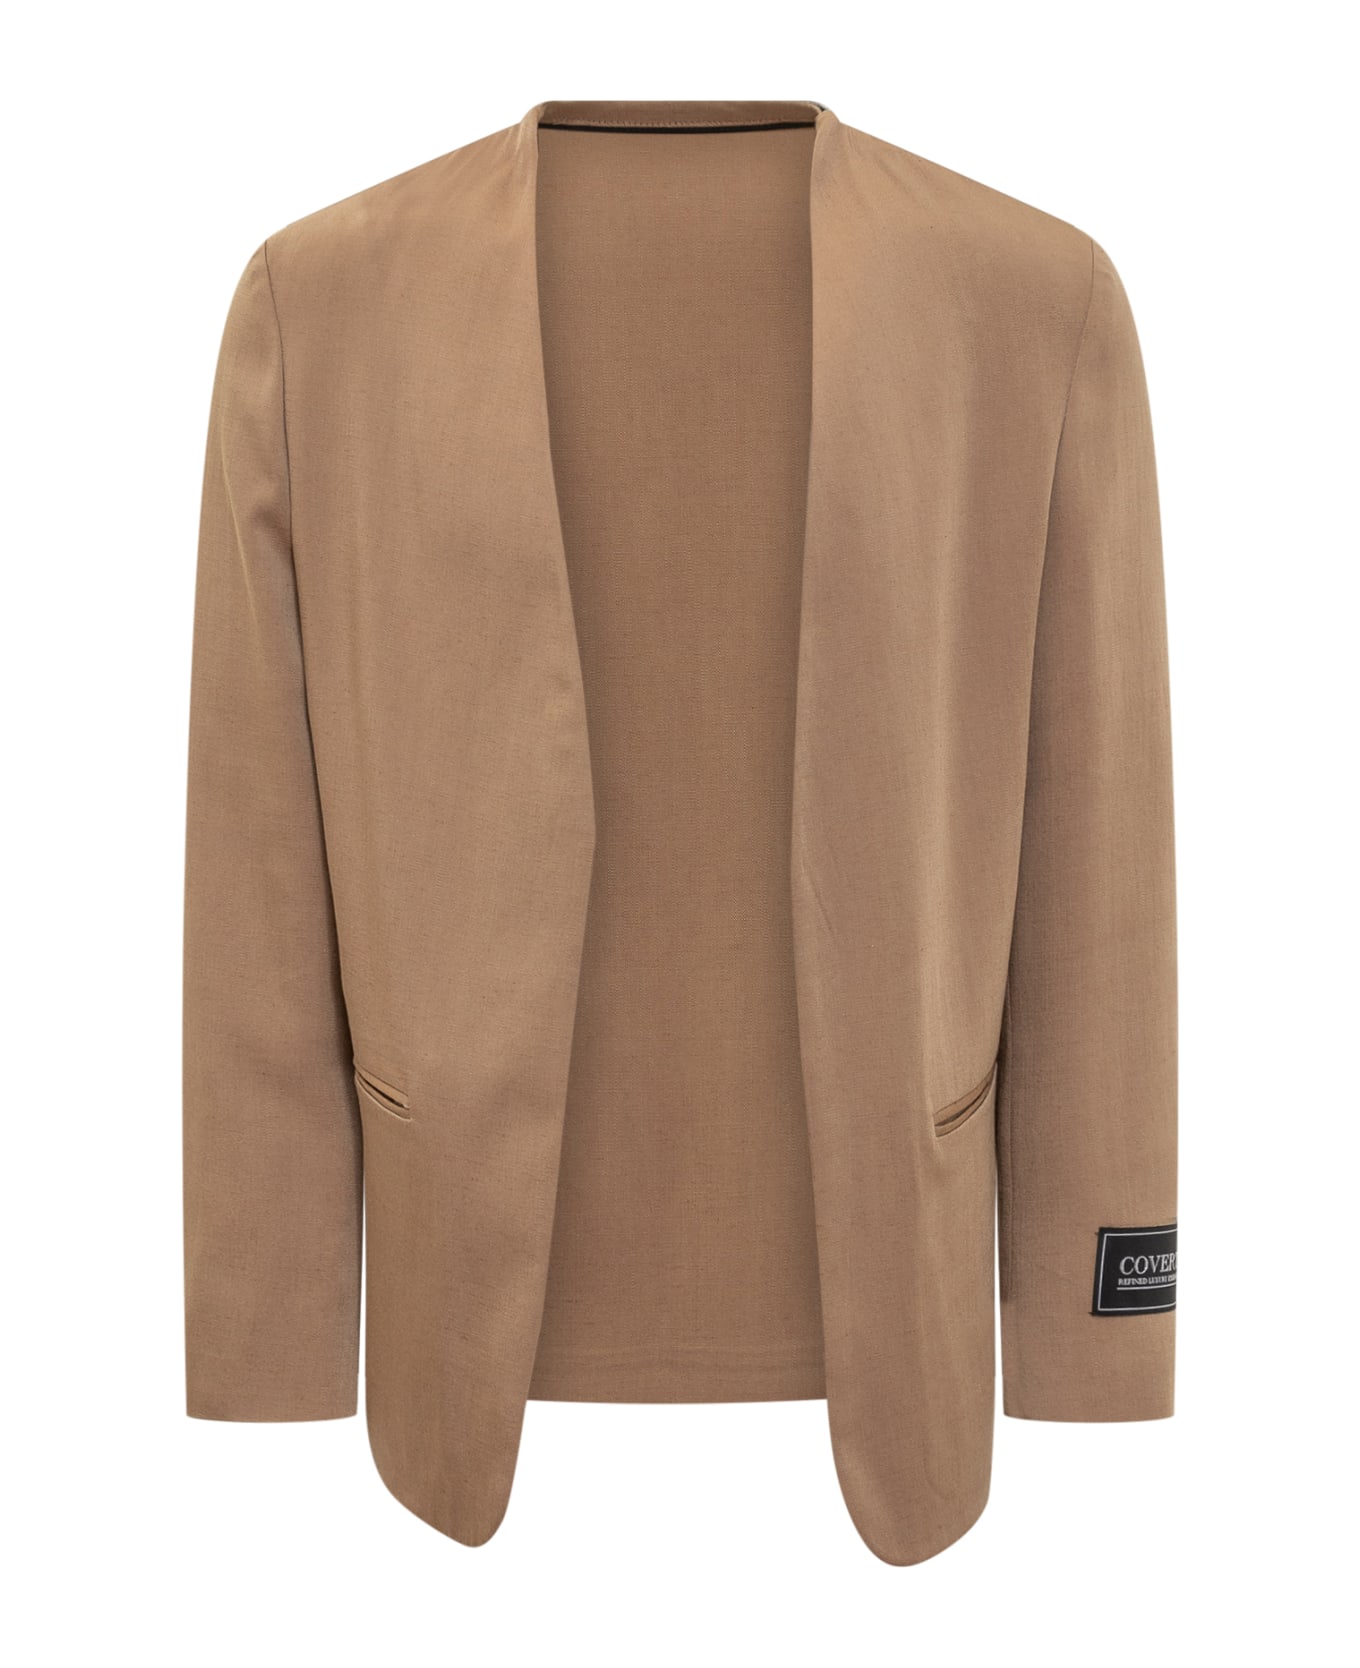 Covert Blazer Open At The Front - TAN ブレザー